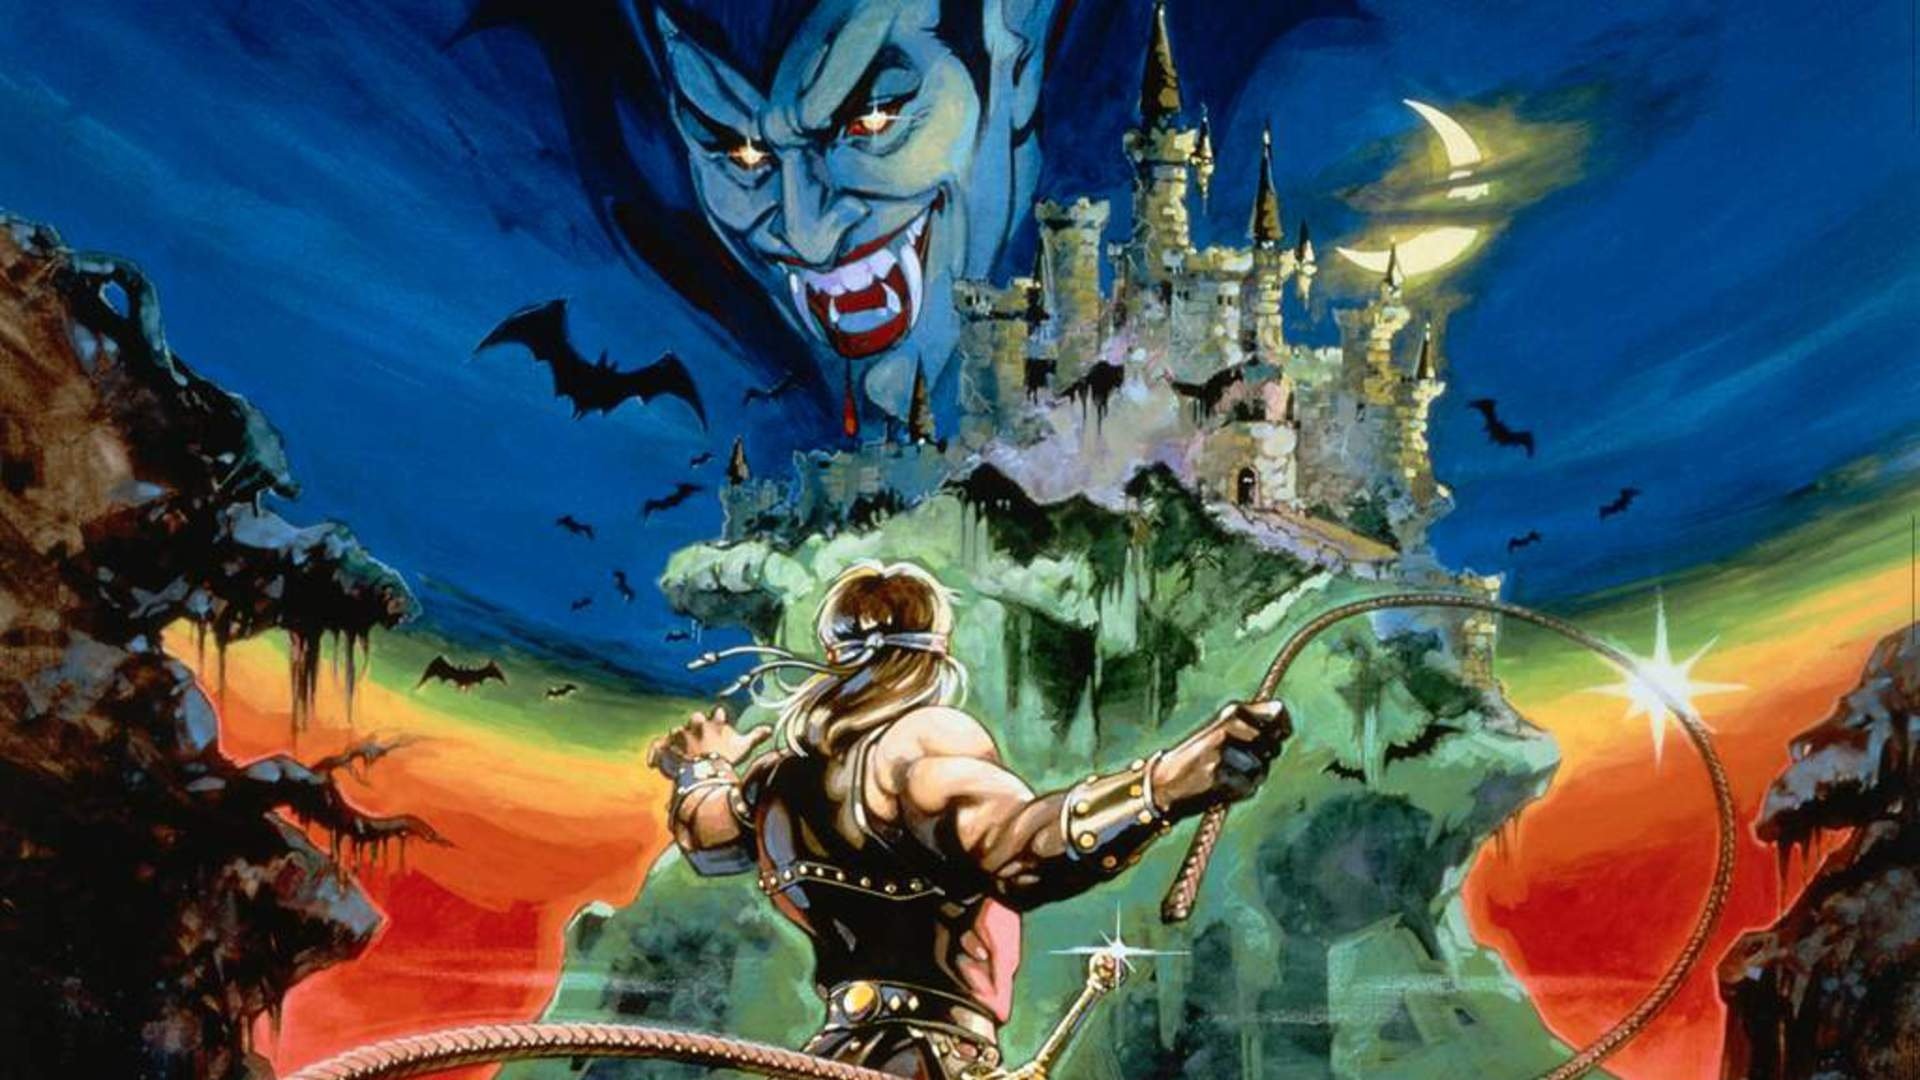 Download full hd 1920x1080 Castlevania PC background ID:391340 for free